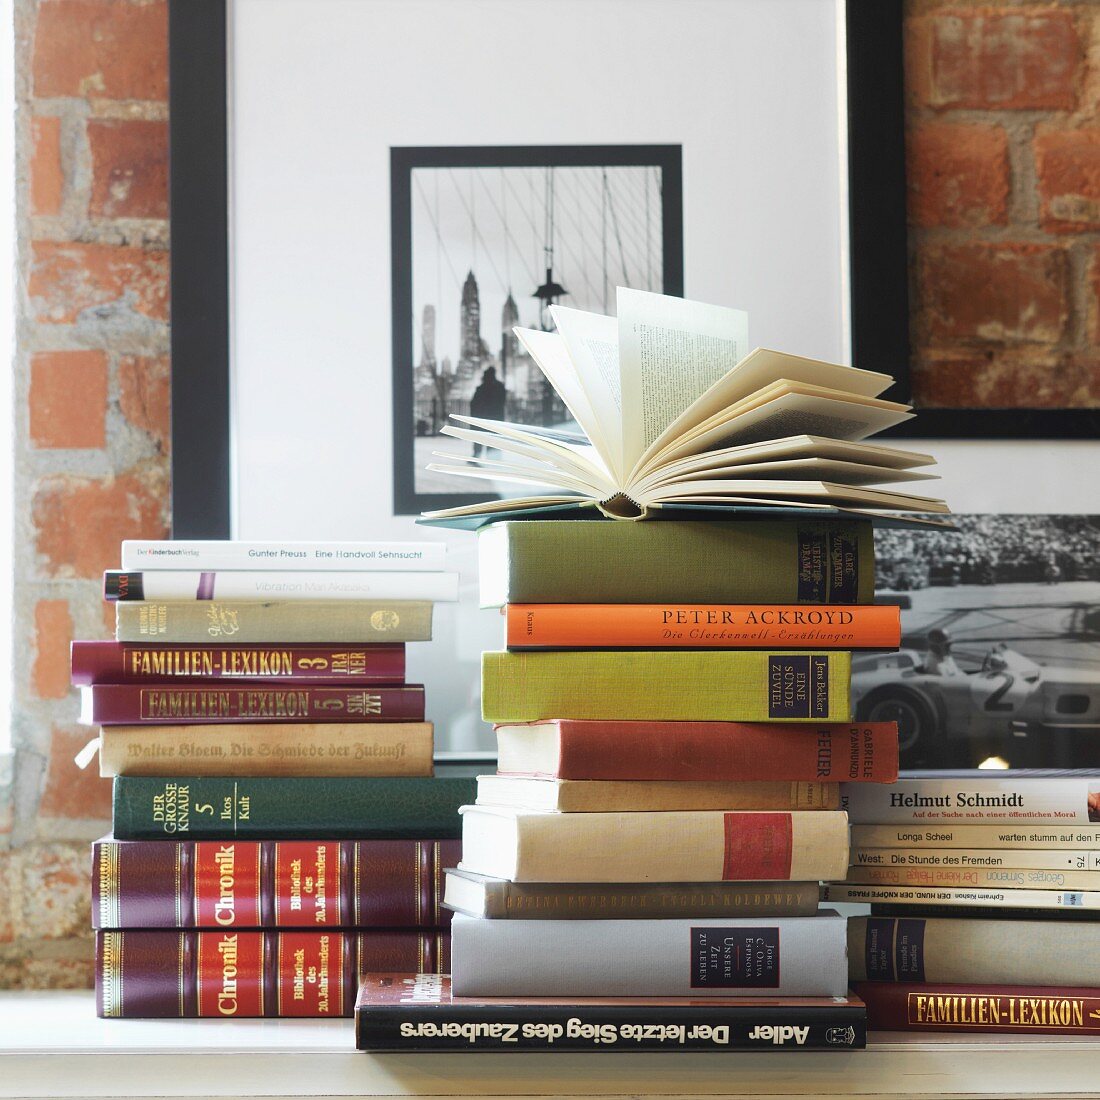 Books stacked on surface against brick wall